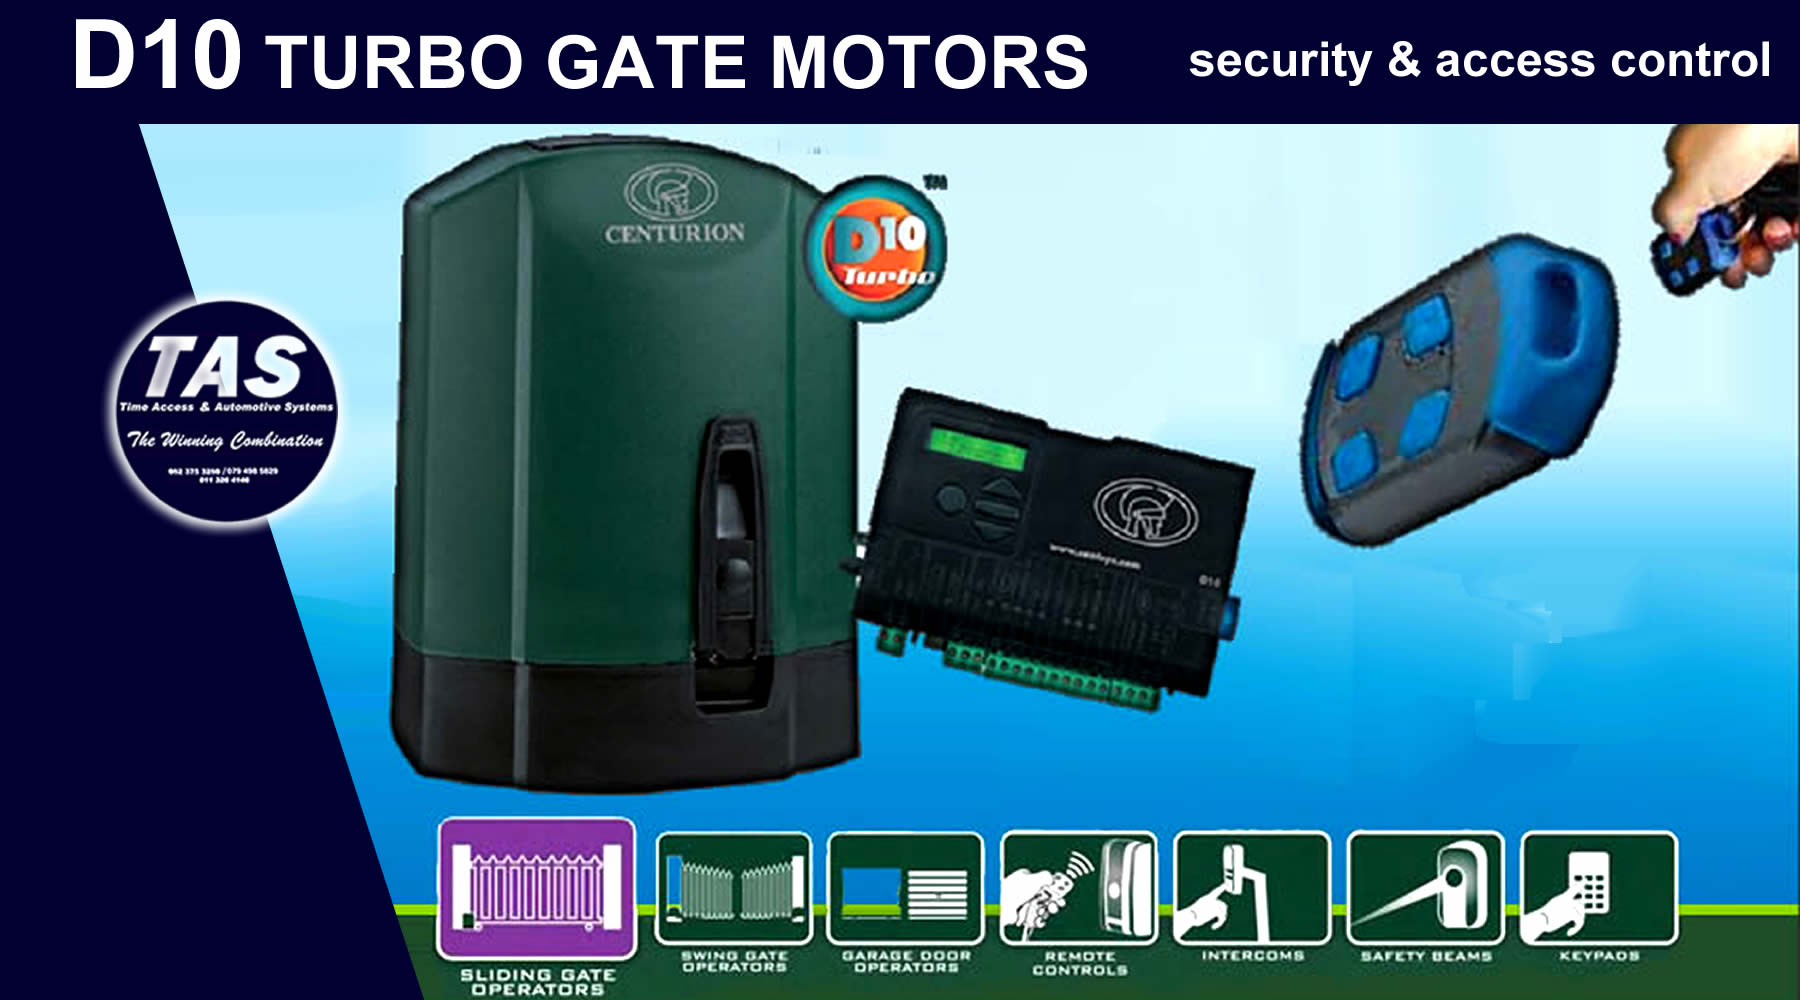 D10 TURBO GATE MOTOR - security control banner